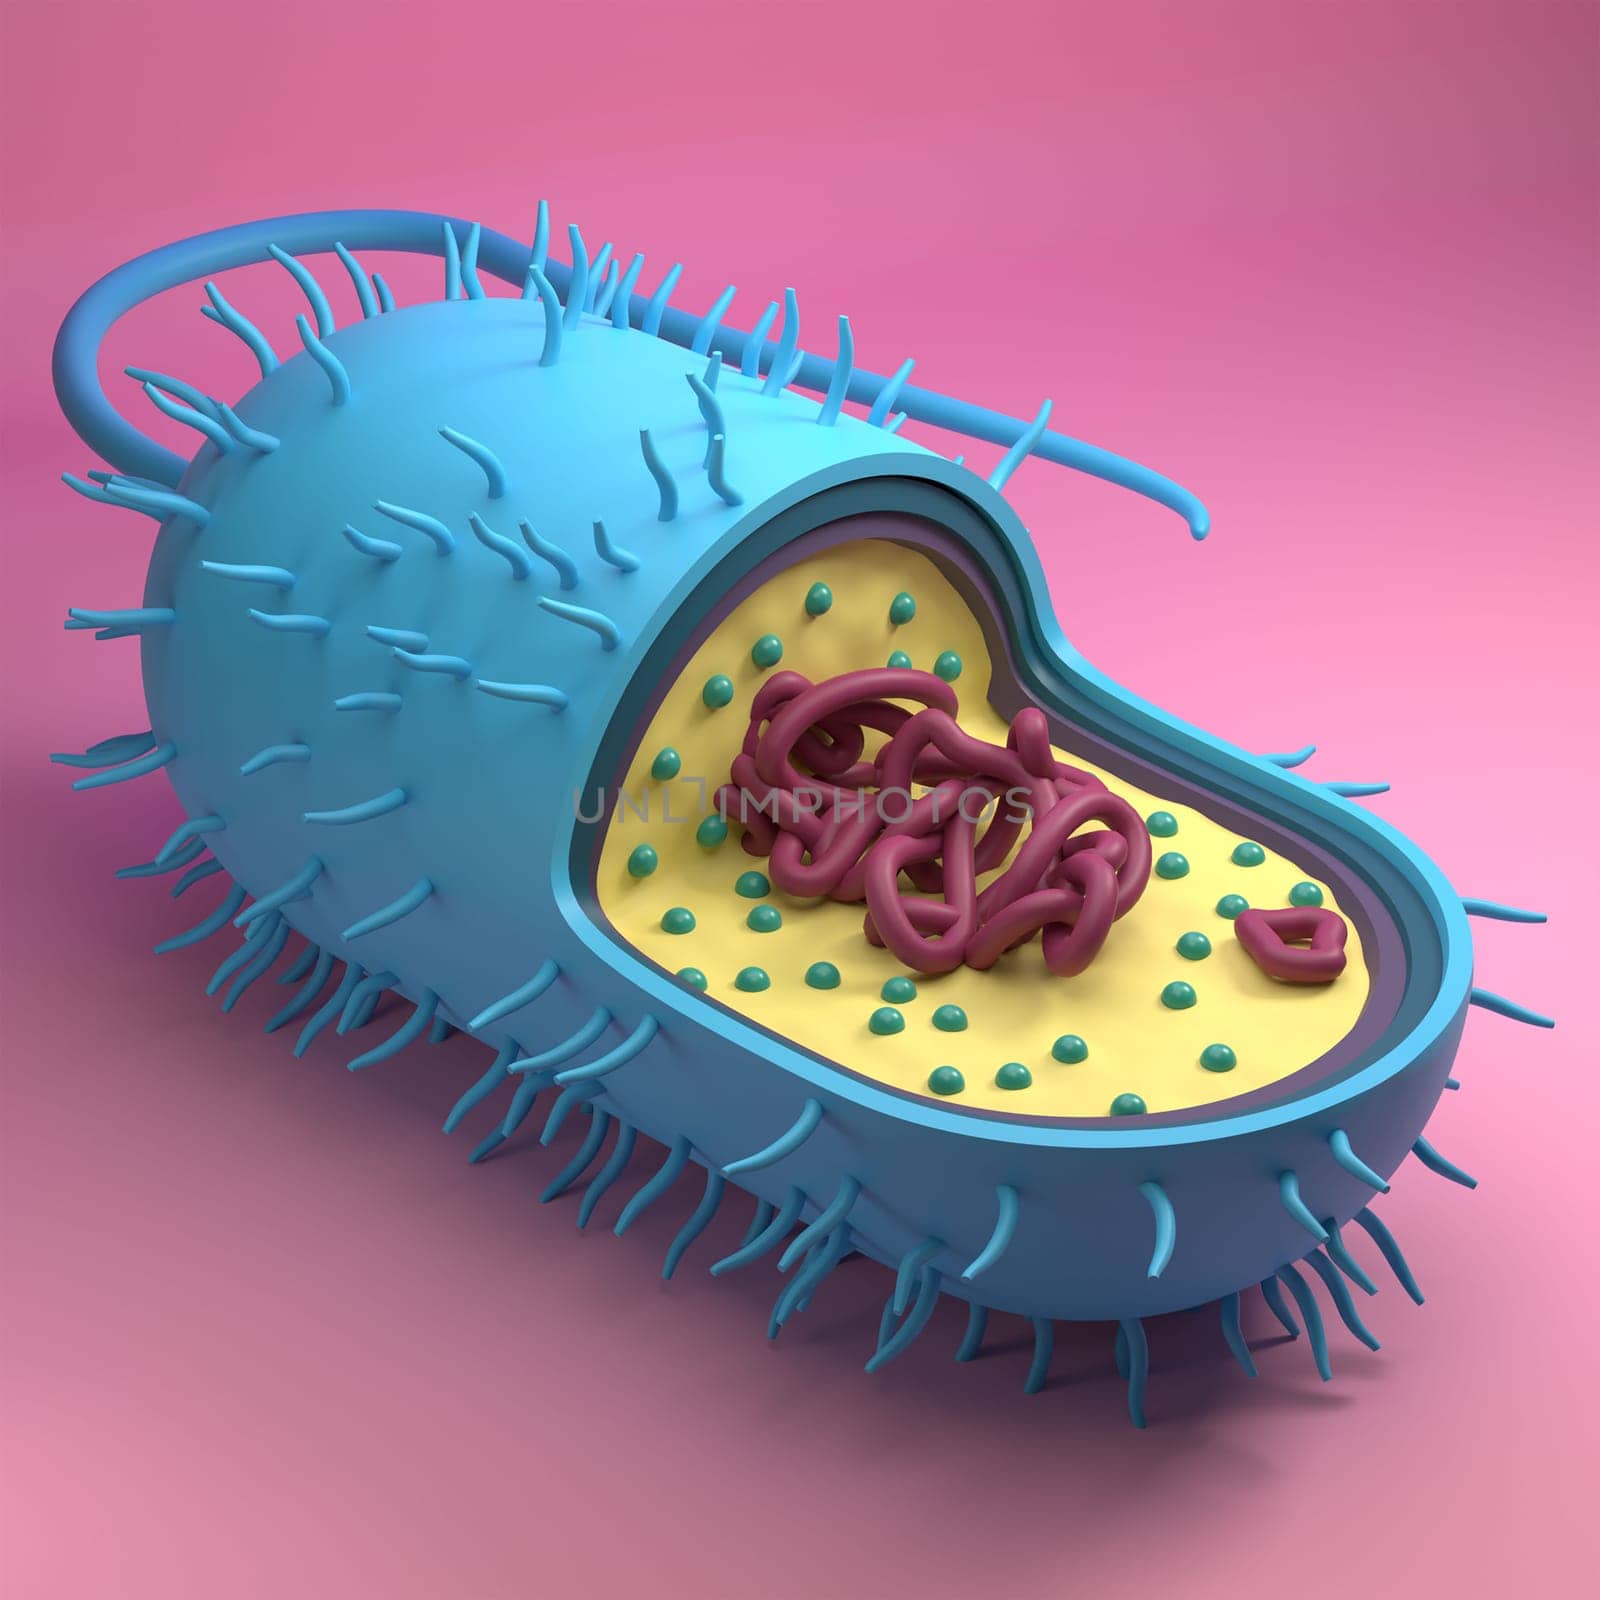 High resolution stylized 3D prokaryotic cell model by AnnaMarin